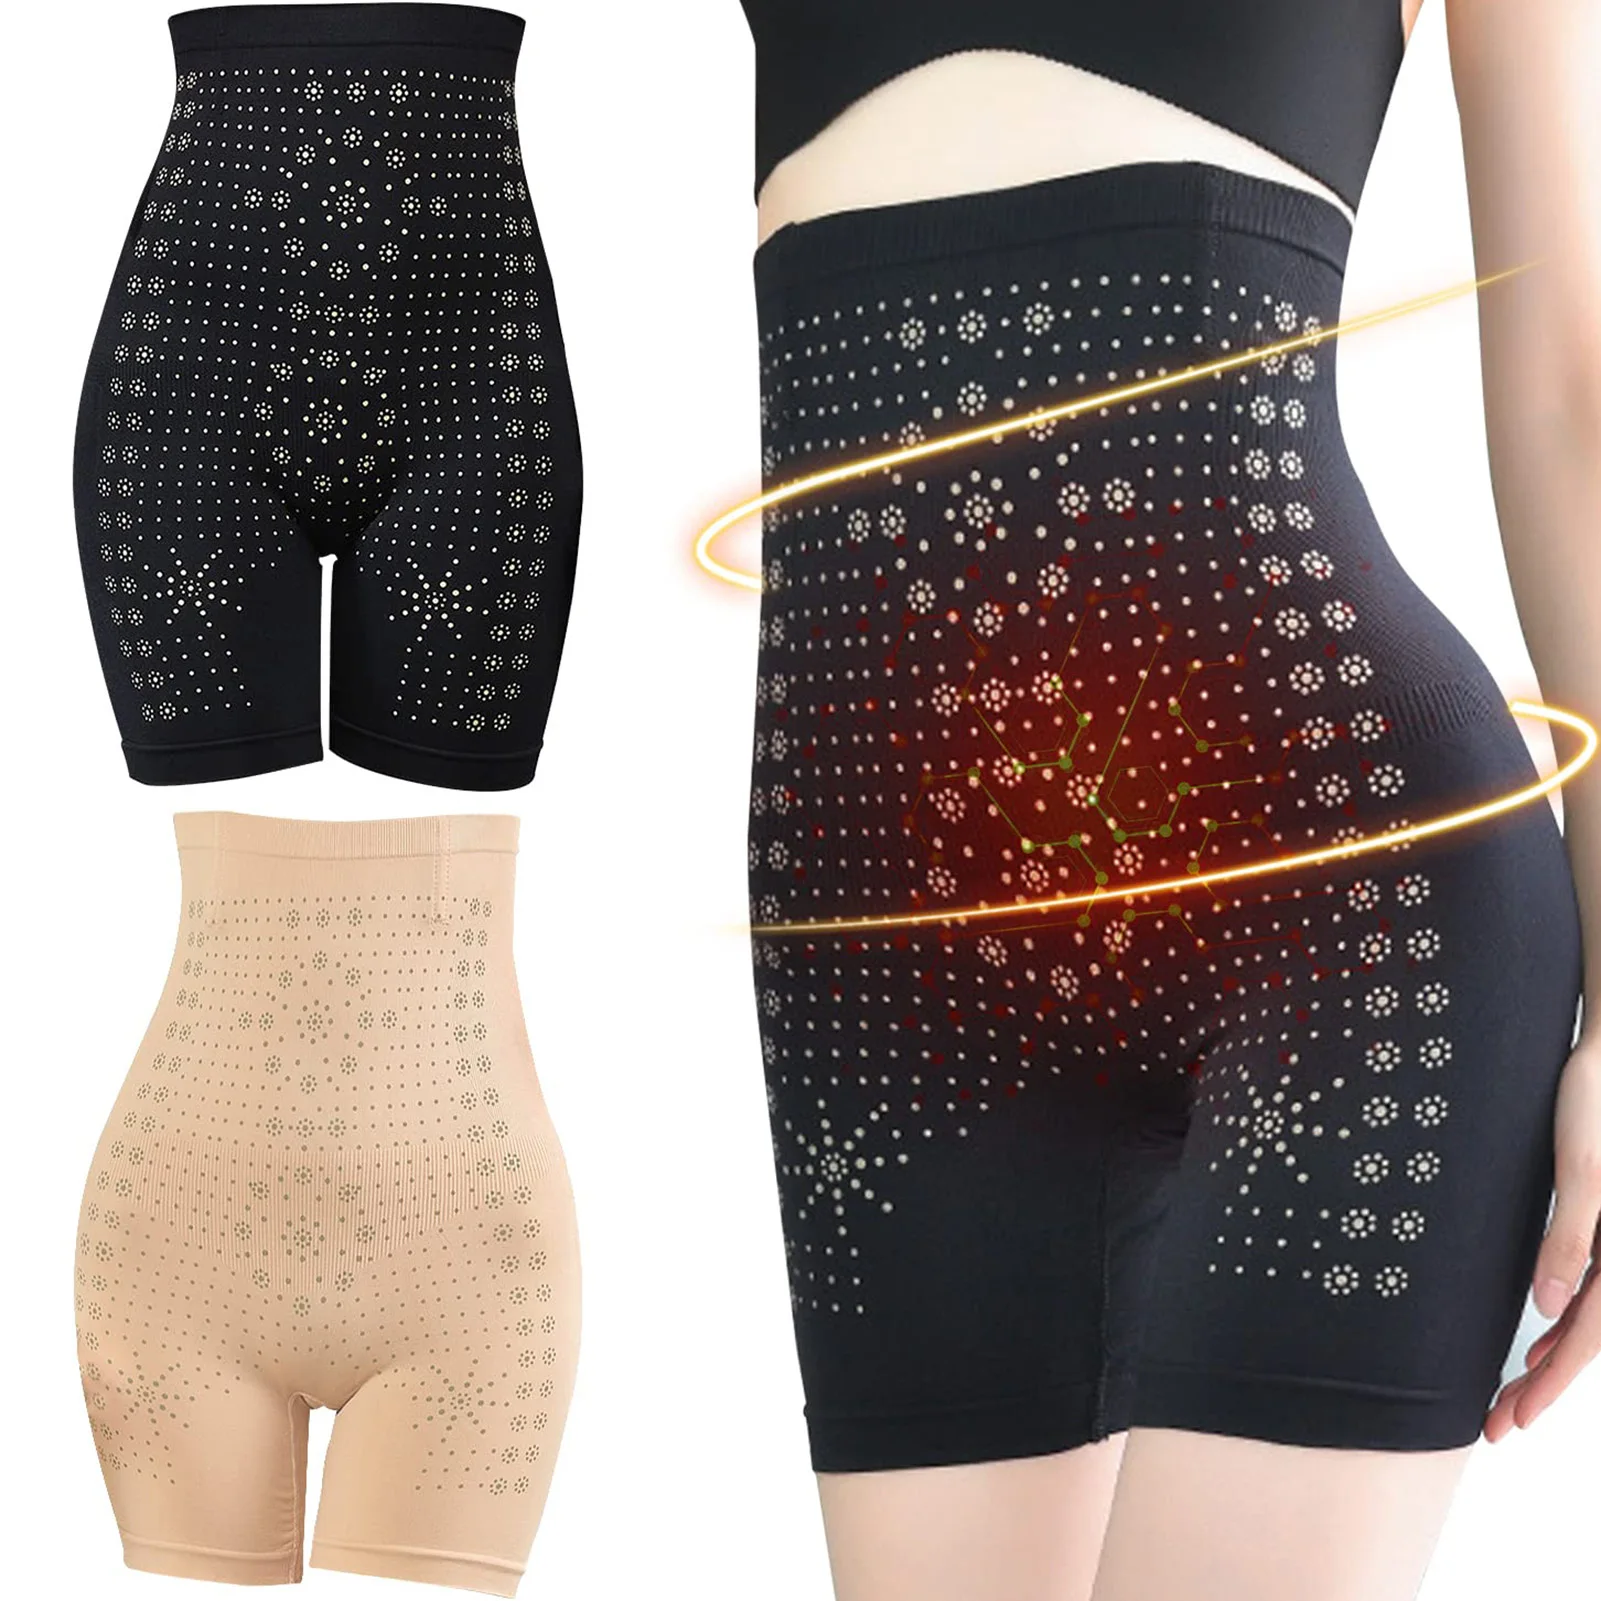 Women High Waist Slimming Shorts Seamless Belly Slimming Body Control Underwear Pants Summer for Lose Weight Body Shaping Pants